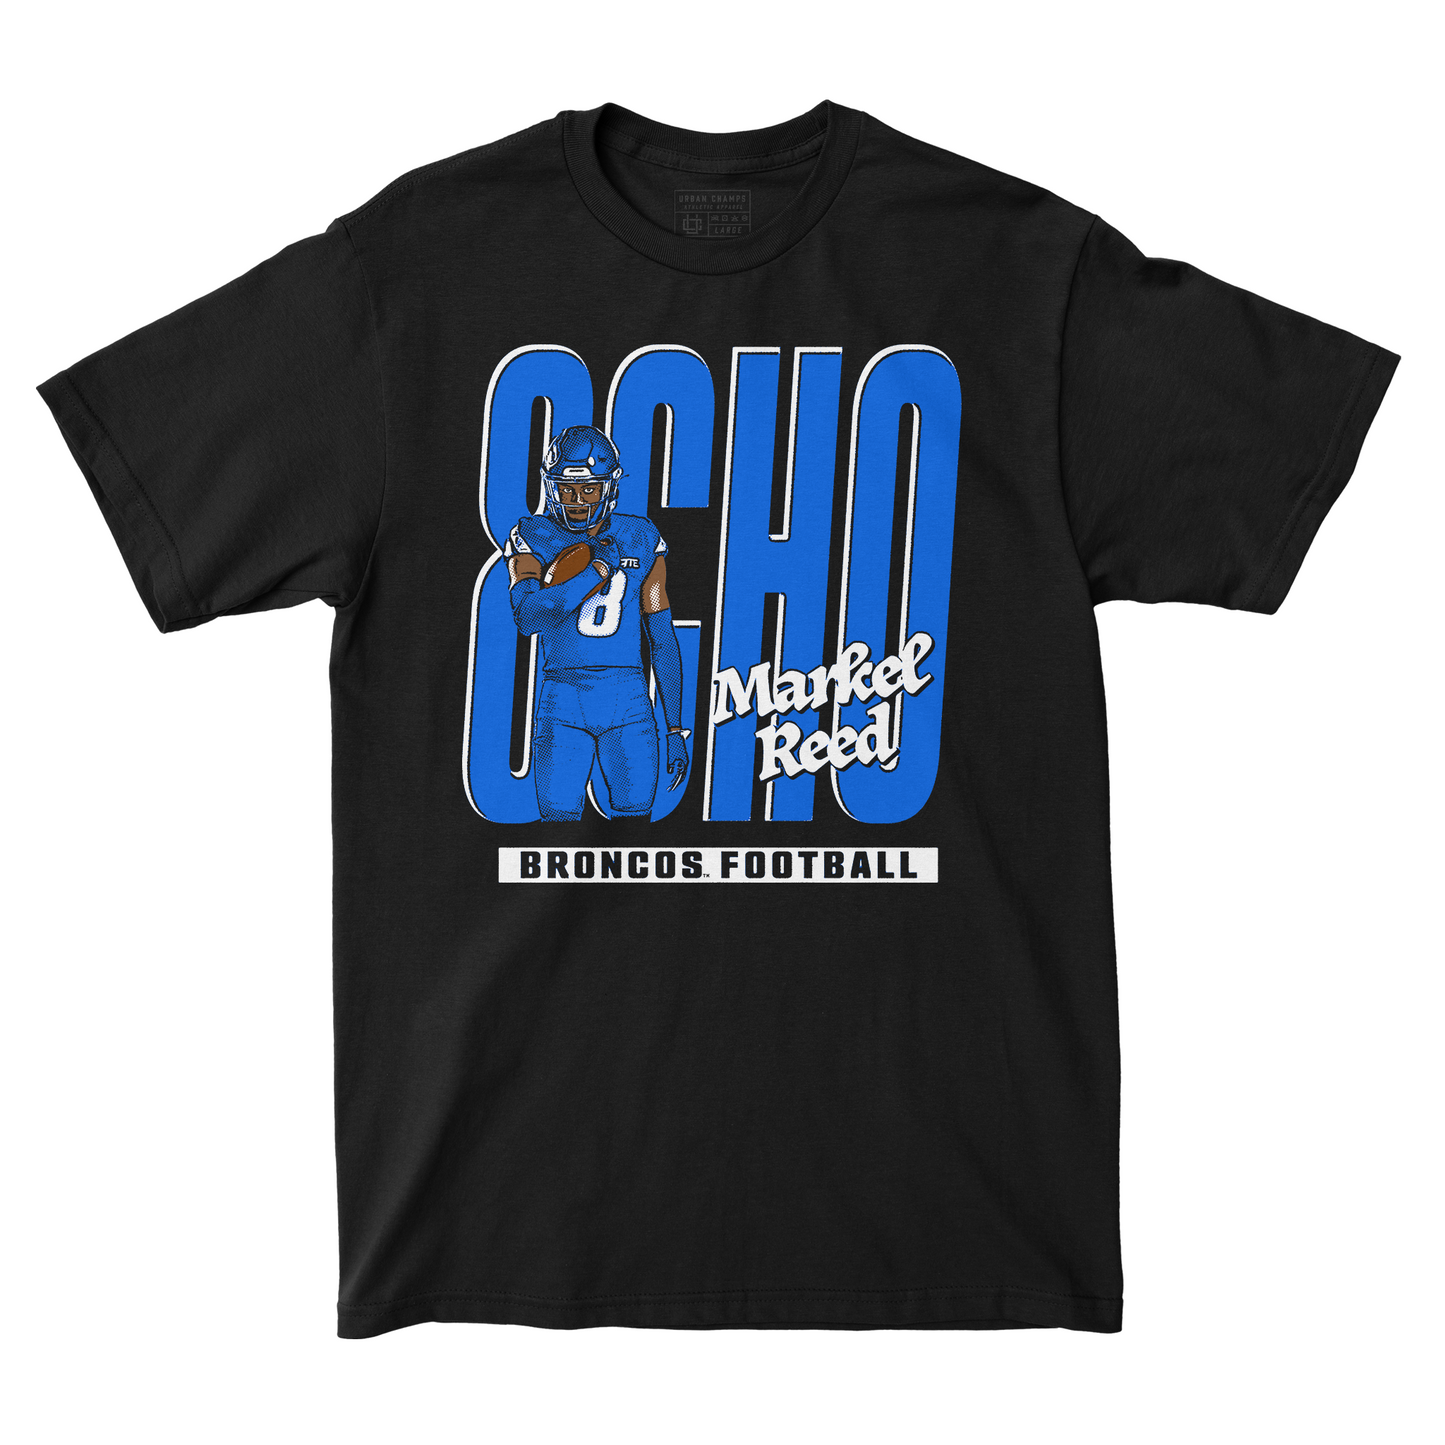 EXCLUSIVE RELEASE: 8CHO Black Tee